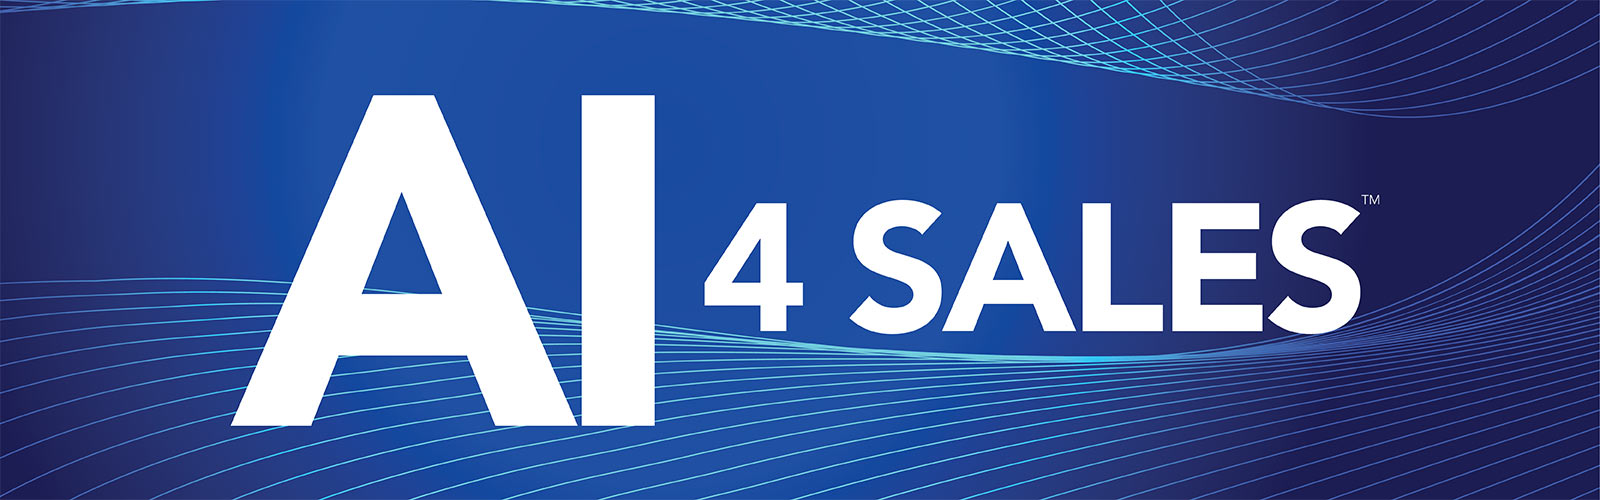 Subscribe to the AI 4 Sales™ / Sales 3.0 Digest